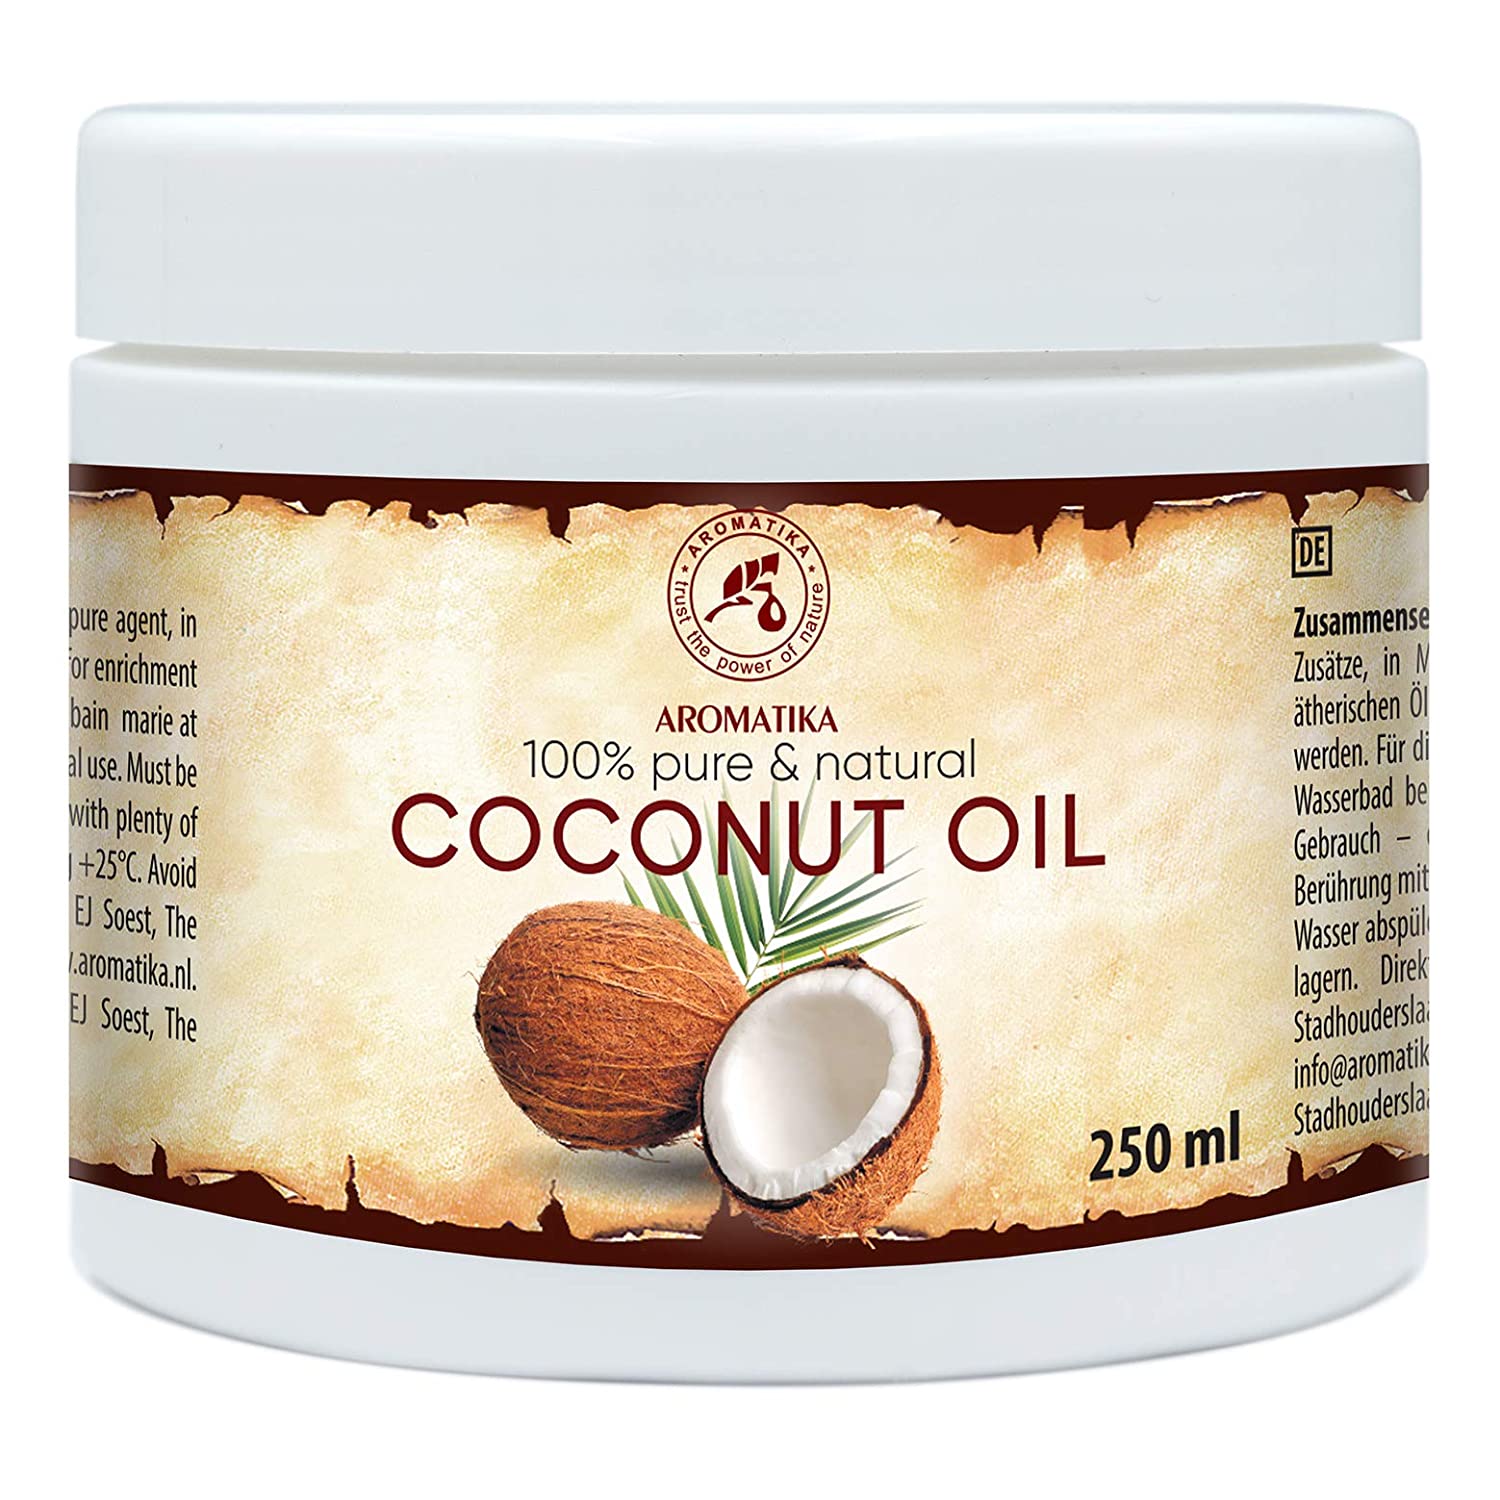  Coconut Essential Oil Mumianhua Coconut Oil Essential Oils 50ml  Fruity Pure Coconut Massage Oil for Skin, Soap Making, Diffuser,  Aromatherapy, Candle Making 1.69 Oz : Health & Household